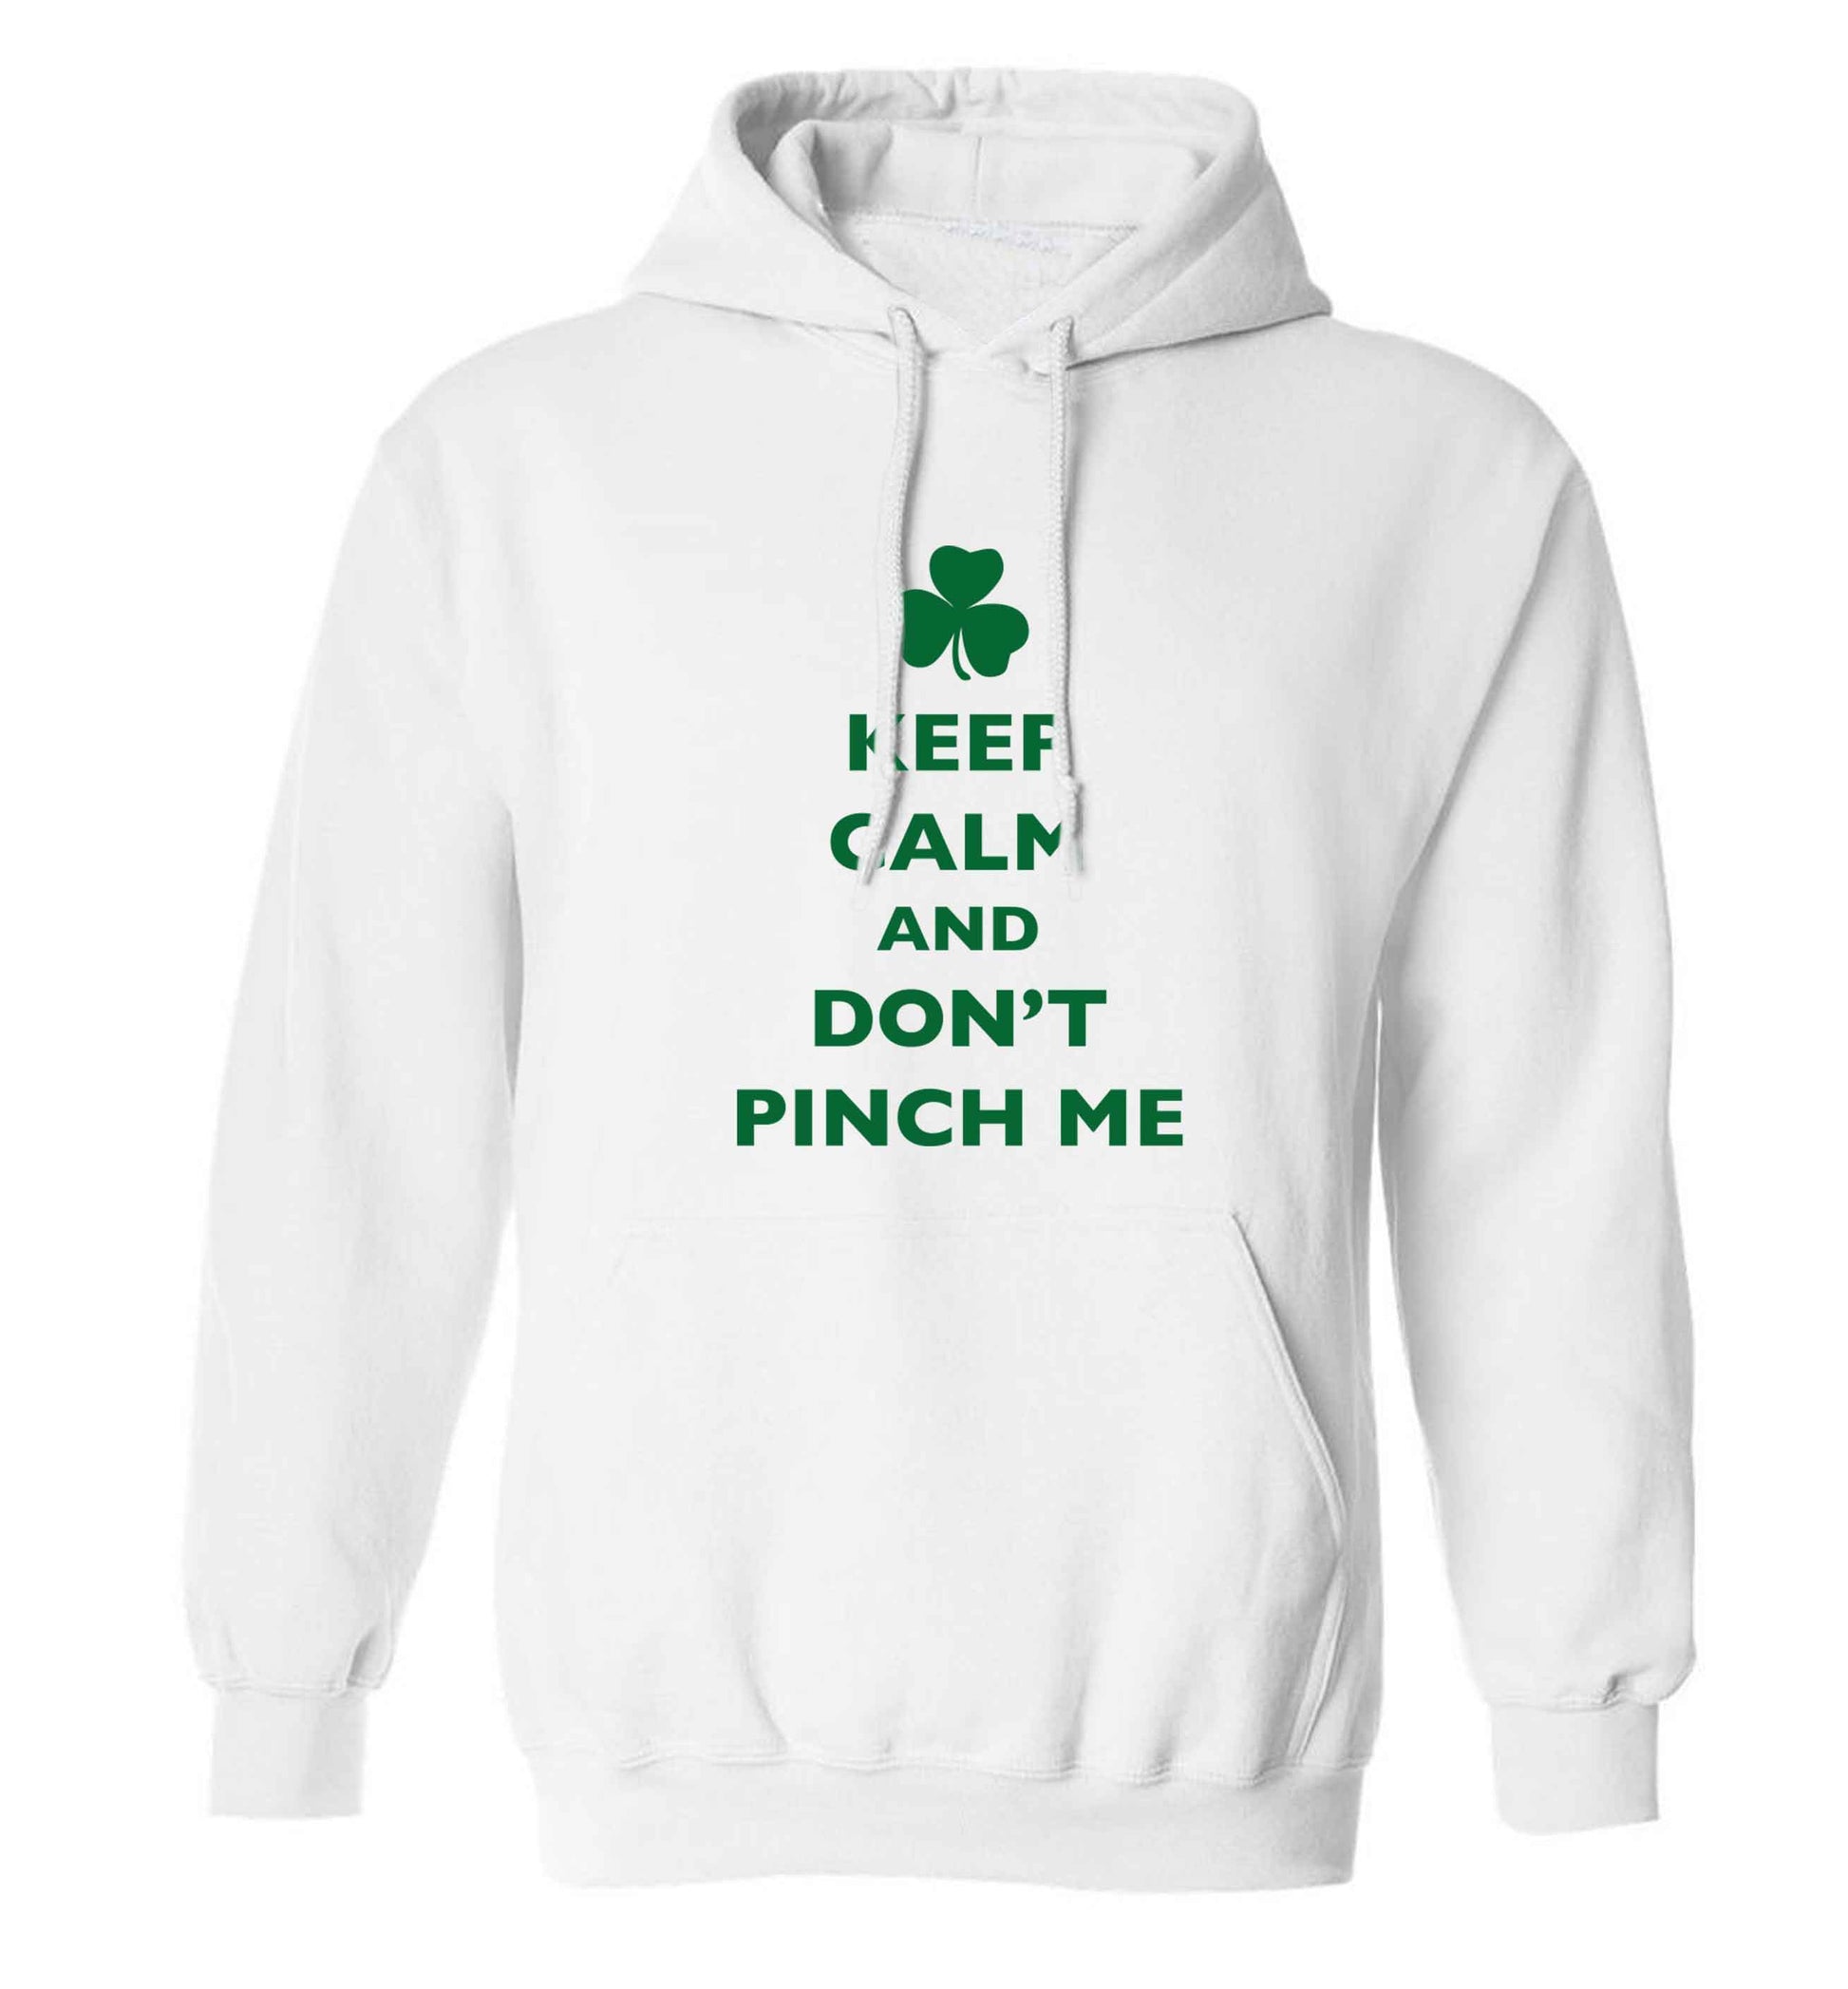 Keep calm and don't pinch me adults unisex white hoodie 2XL